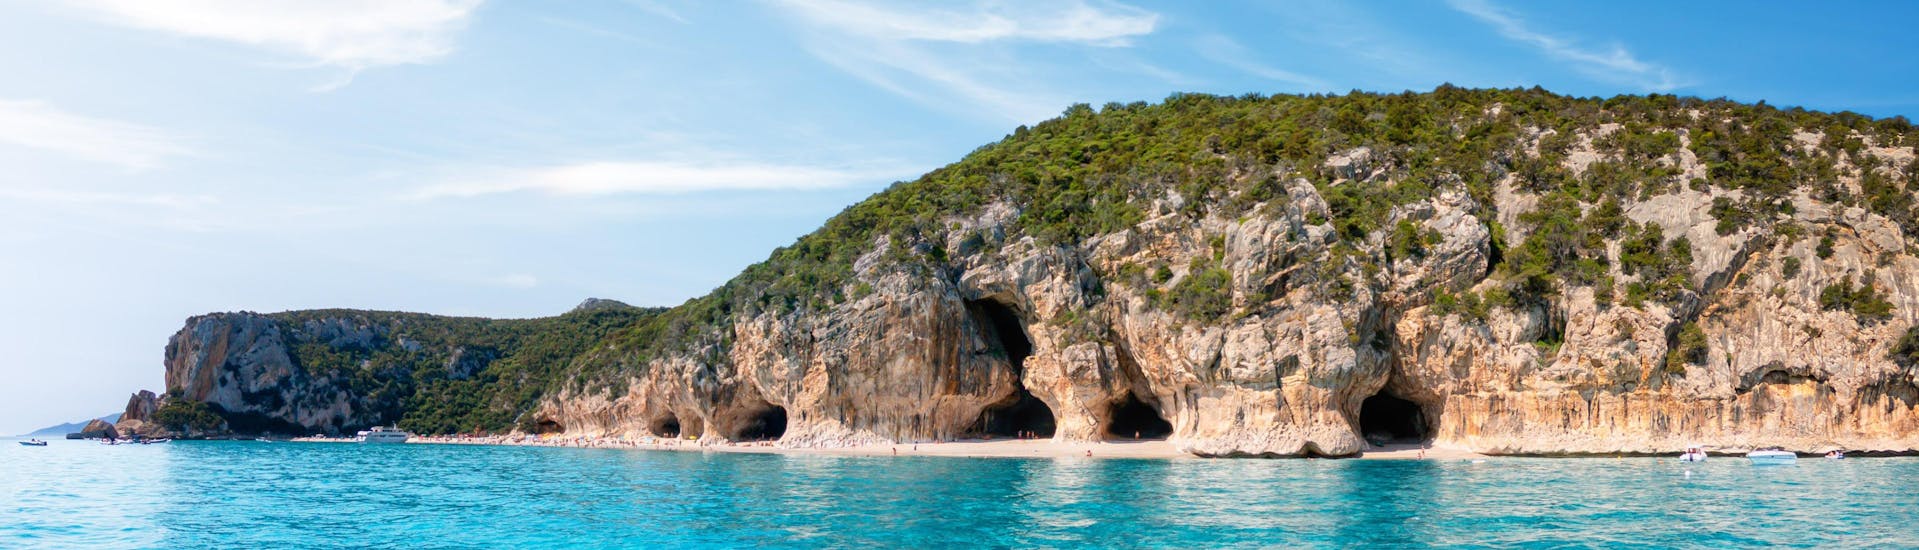 Picture of the caves along the coast of Cala Luna, Sardinia, a popular destination for boat trips.